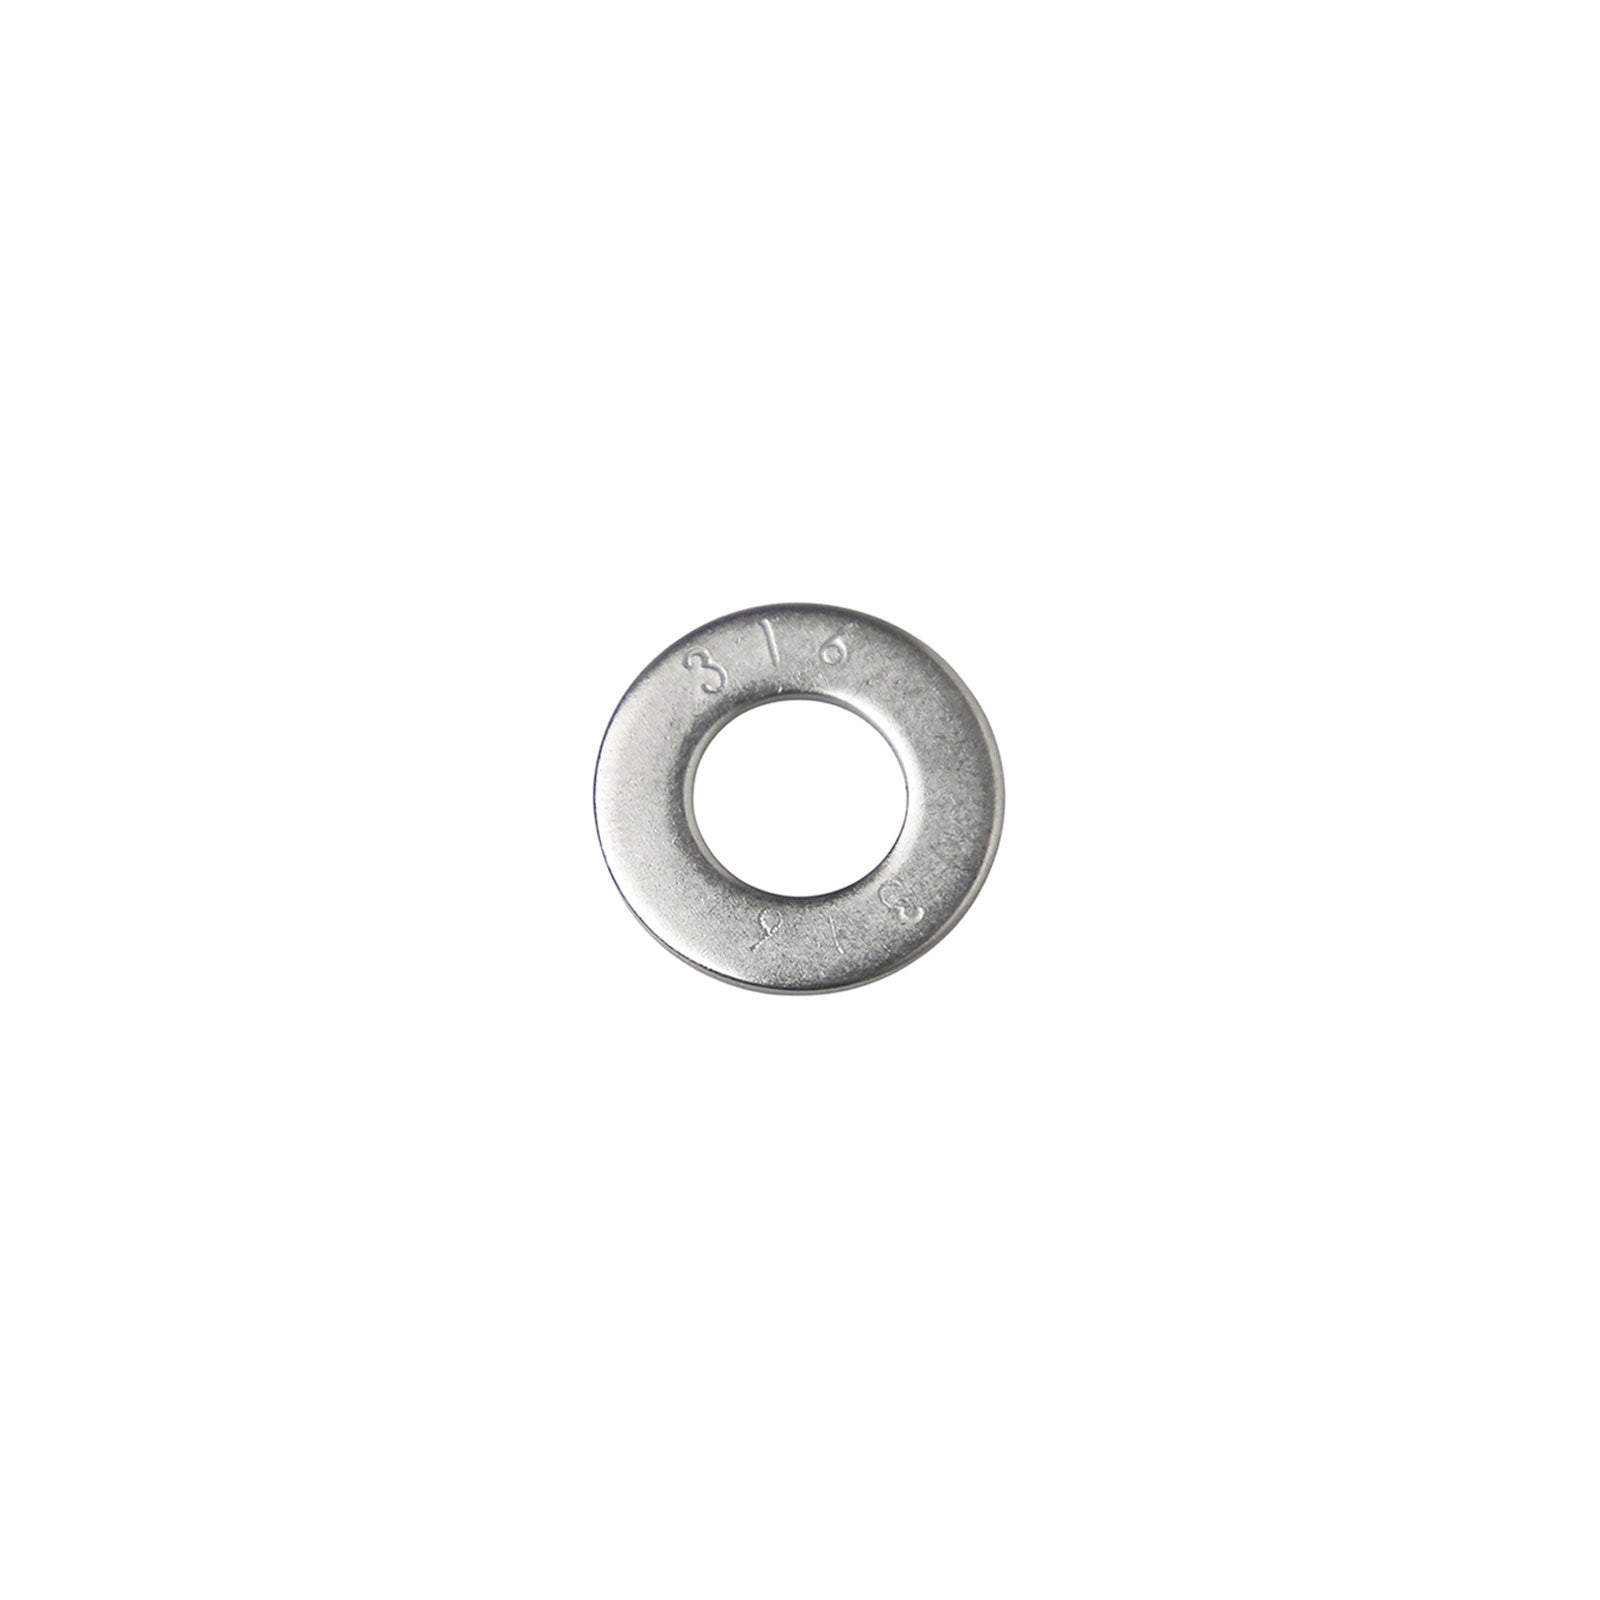 3/8" Conquest SAE Flat Washer - 316 Stainless Steel